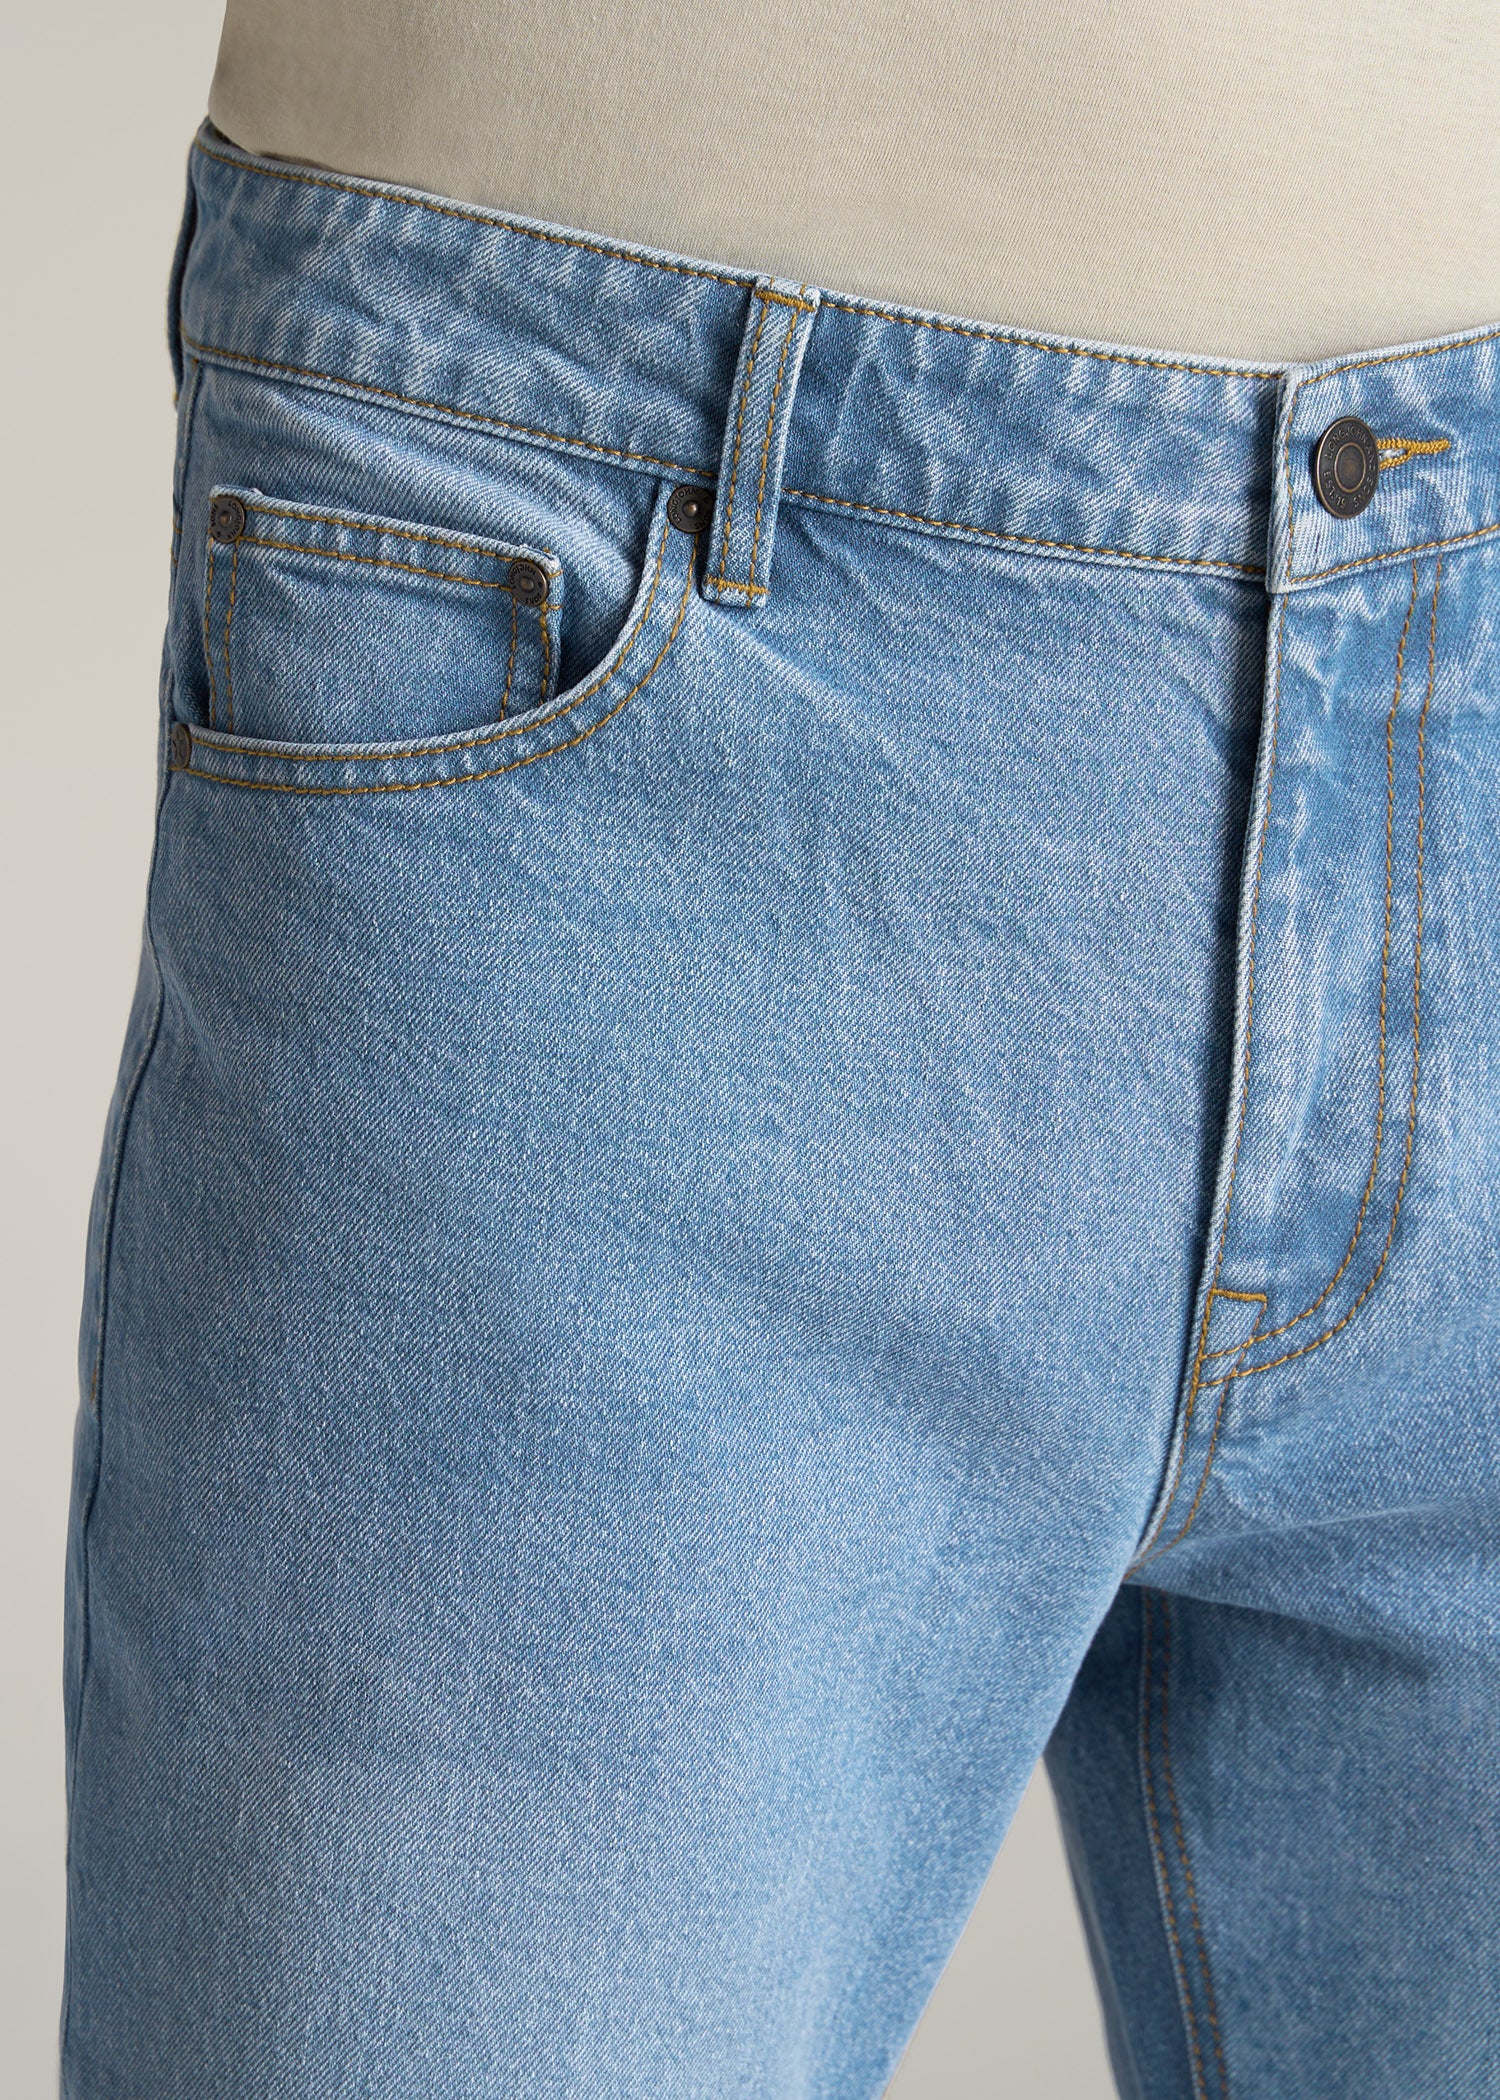 Straight Fit Jeans for Tall Men | American Tall